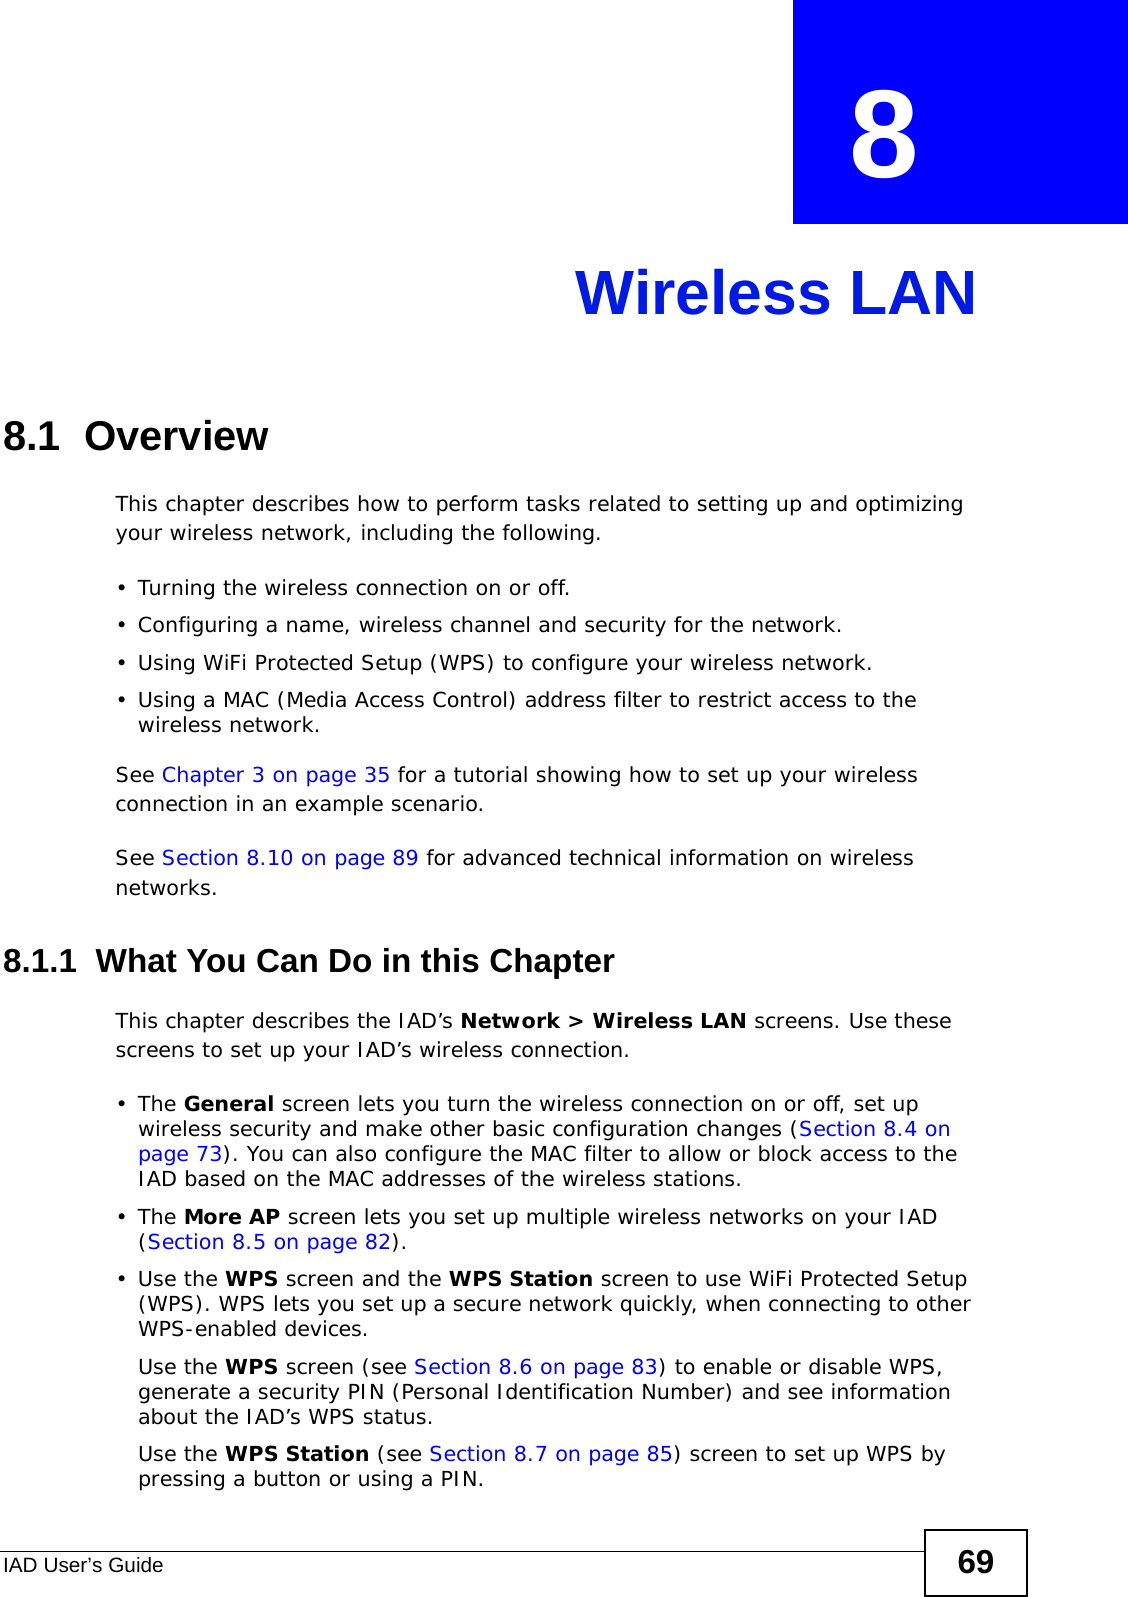 IAD User’s Guide 69CHAPTER  8 Wireless LAN8.1  Overview This chapter describes how to perform tasks related to setting up and optimizing your wireless network, including the following.• Turning the wireless connection on or off.• Configuring a name, wireless channel and security for the network.• Using WiFi Protected Setup (WPS) to configure your wireless network.• Using a MAC (Media Access Control) address filter to restrict access to the wireless network.See Chapter 3 on page 35 for a tutorial showing how to set up your wireless connection in an example scenario.See Section 8.10 on page 89 for advanced technical information on wireless networks.8.1.1  What You Can Do in this ChapterThis chapter describes the IAD’s Network &gt; Wireless LAN screens. Use these screens to set up your IAD’s wireless connection.•The General screen lets you turn the wireless connection on or off, set up wireless security and make other basic configuration changes (Section 8.4 on page 73). You can also configure the MAC filter to allow or block access to the IAD based on the MAC addresses of the wireless stations.•The More AP screen lets you set up multiple wireless networks on your IAD (Section 8.5 on page 82).•Use the WPS screen and the WPS Station screen to use WiFi Protected Setup (WPS). WPS lets you set up a secure network quickly, when connecting to other WPS-enabled devices. Use the WPS screen (see Section 8.6 on page 83) to enable or disable WPS, generate a security PIN (Personal Identification Number) and see information about the IAD’s WPS status.Use the WPS Station (see Section 8.7 on page 85) screen to set up WPS by pressing a button or using a PIN.